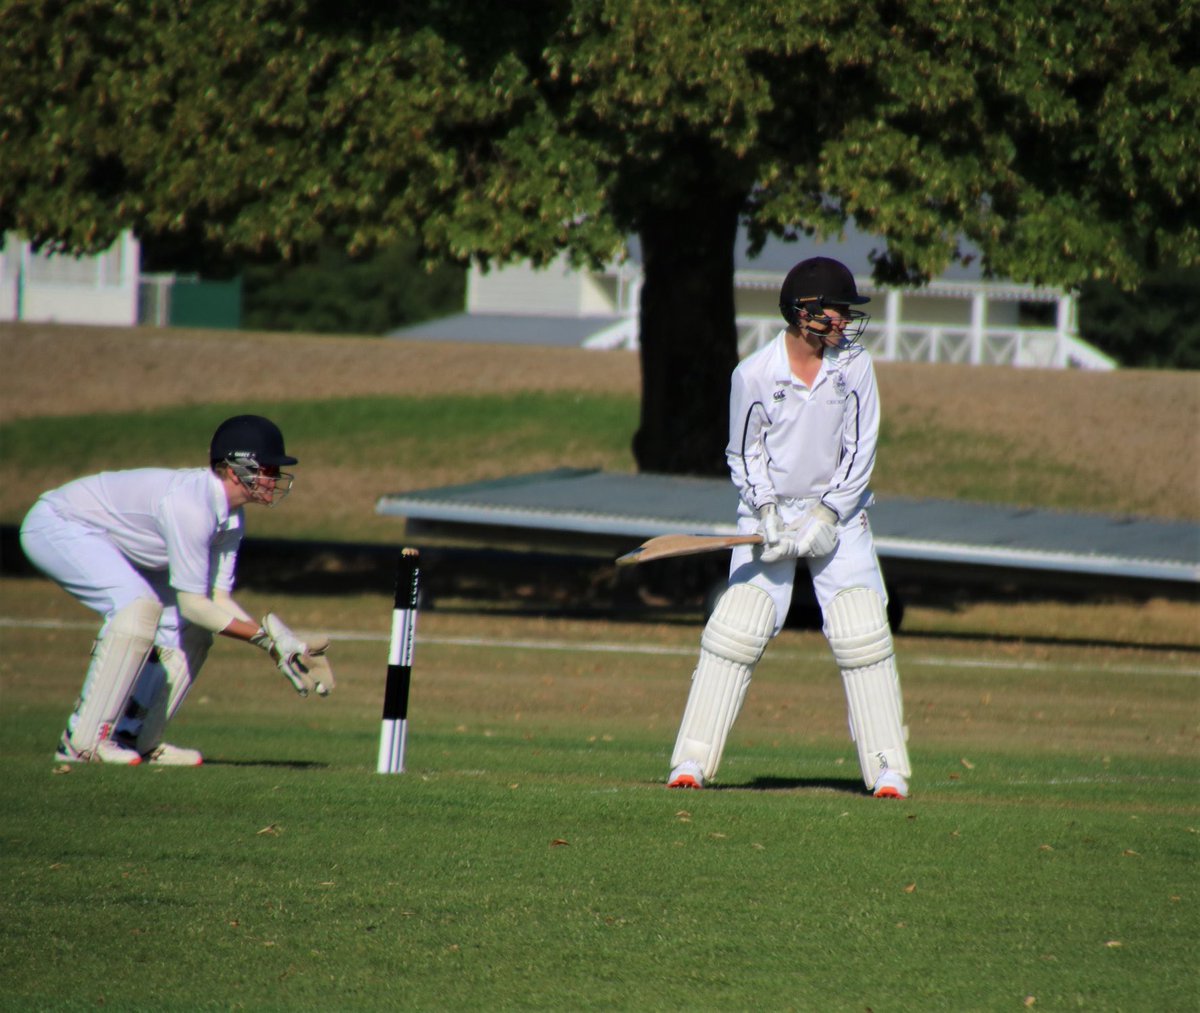 ✈️ NEW OVERSEAS SIGNING 🇳🇿

We are delighted to announce our overseas signing, Will Hocquard to Falmouth CC

Will has joined us from Heathcote Cricket Club.

We can’t wait to see him in action this season!

🦅🟢🟡

#newsigning #FCC #upthefal #cricket #fcceagles